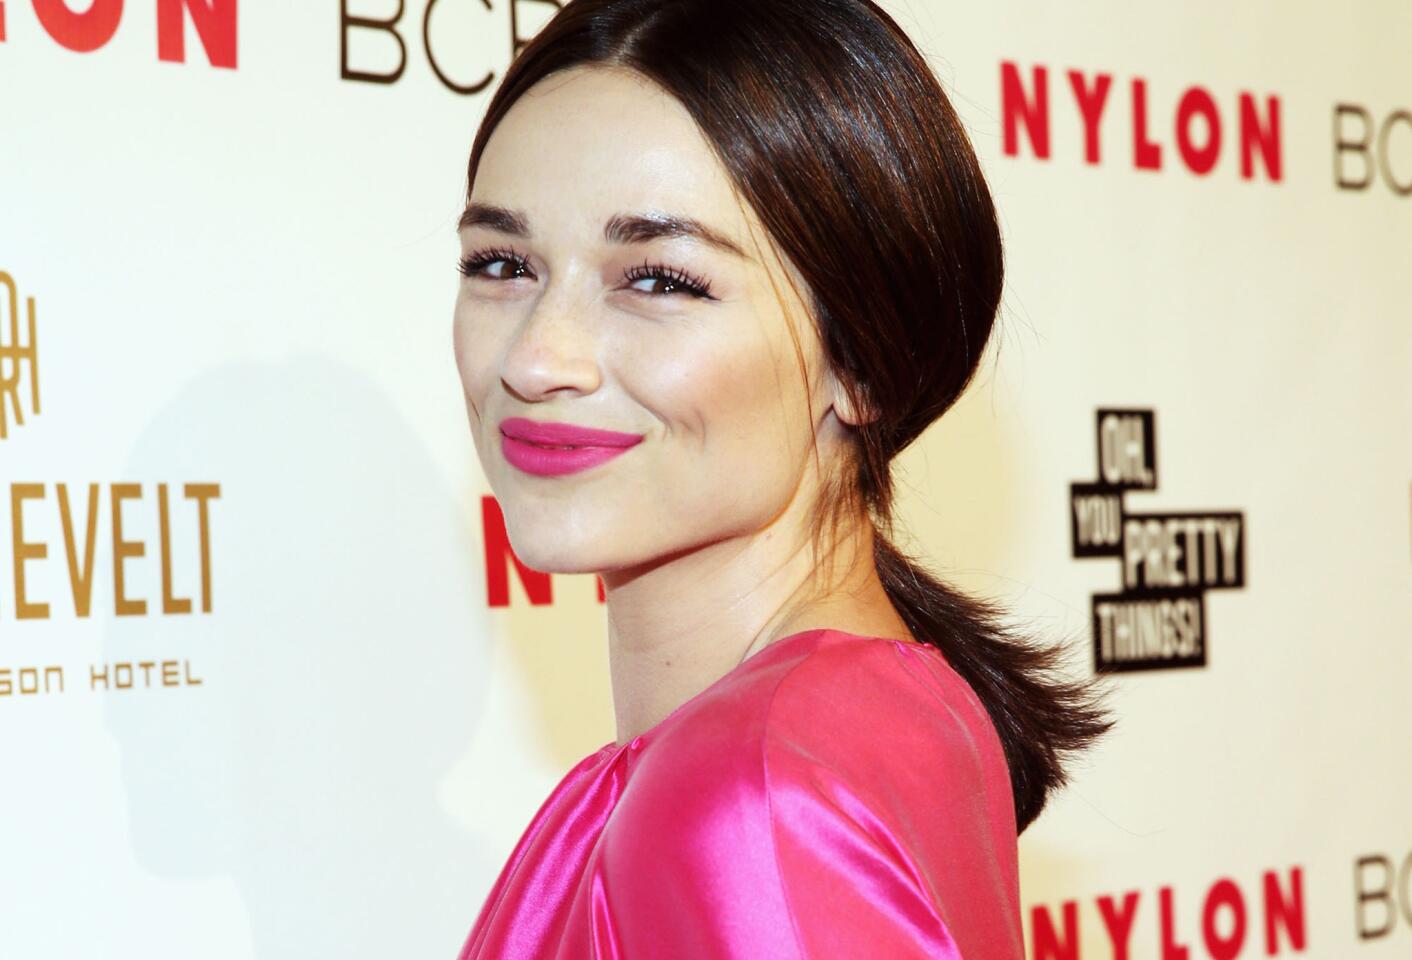 Nylon + BCBGeneration May Young Hollywood Party